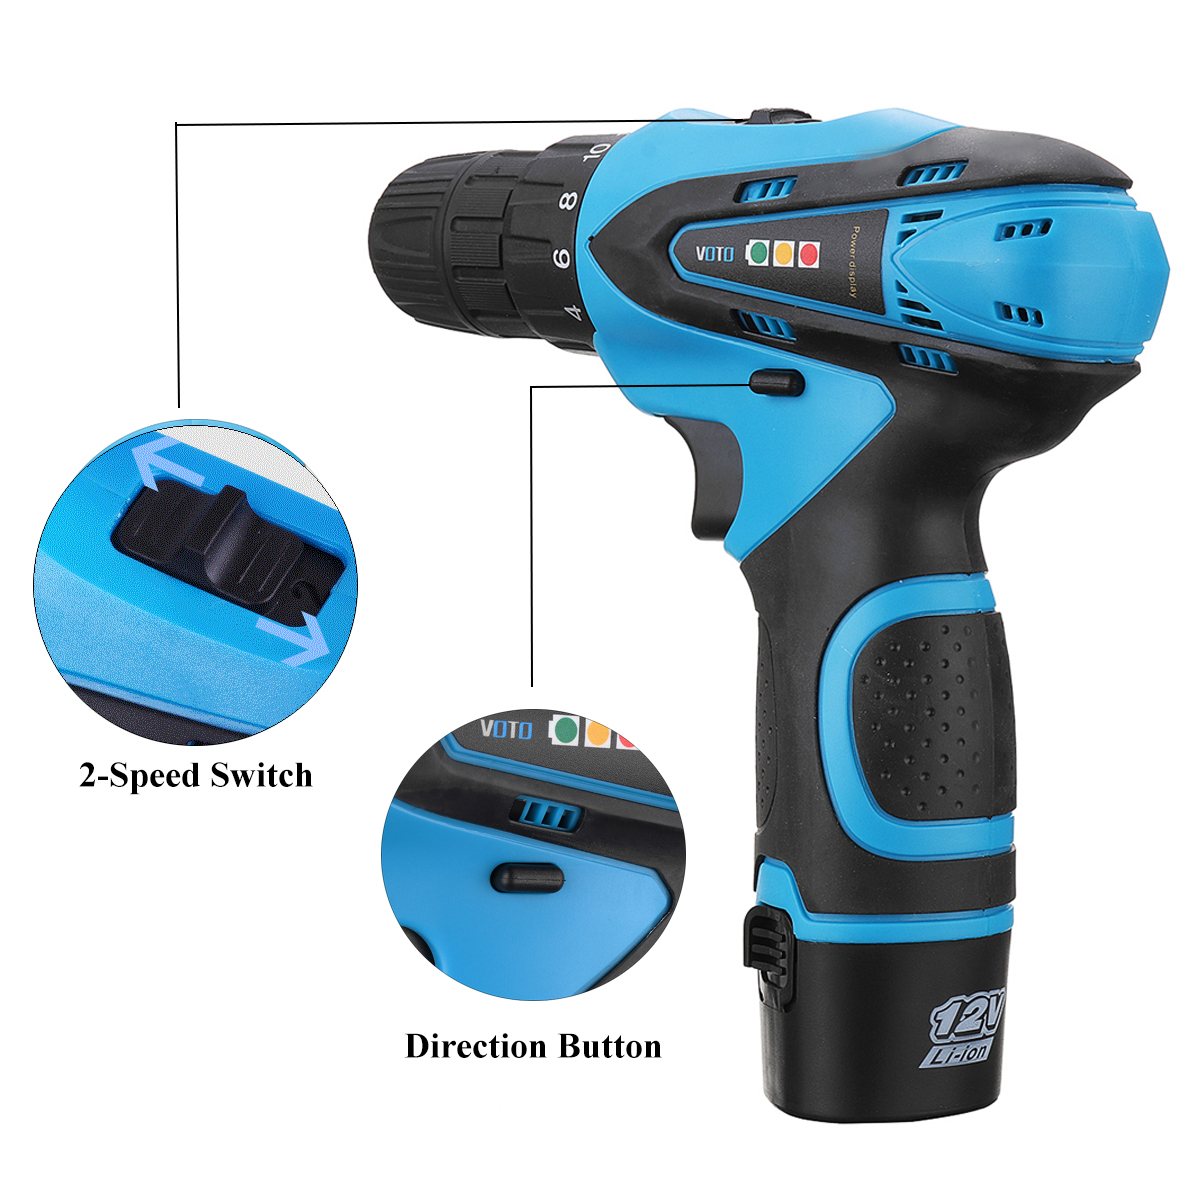 VOTO-12V-Cordless-Power-Drill-Driver-Screw-2-Speed-Lithium-ion-Electric-Screwdriver-with-Battery-1289387-6